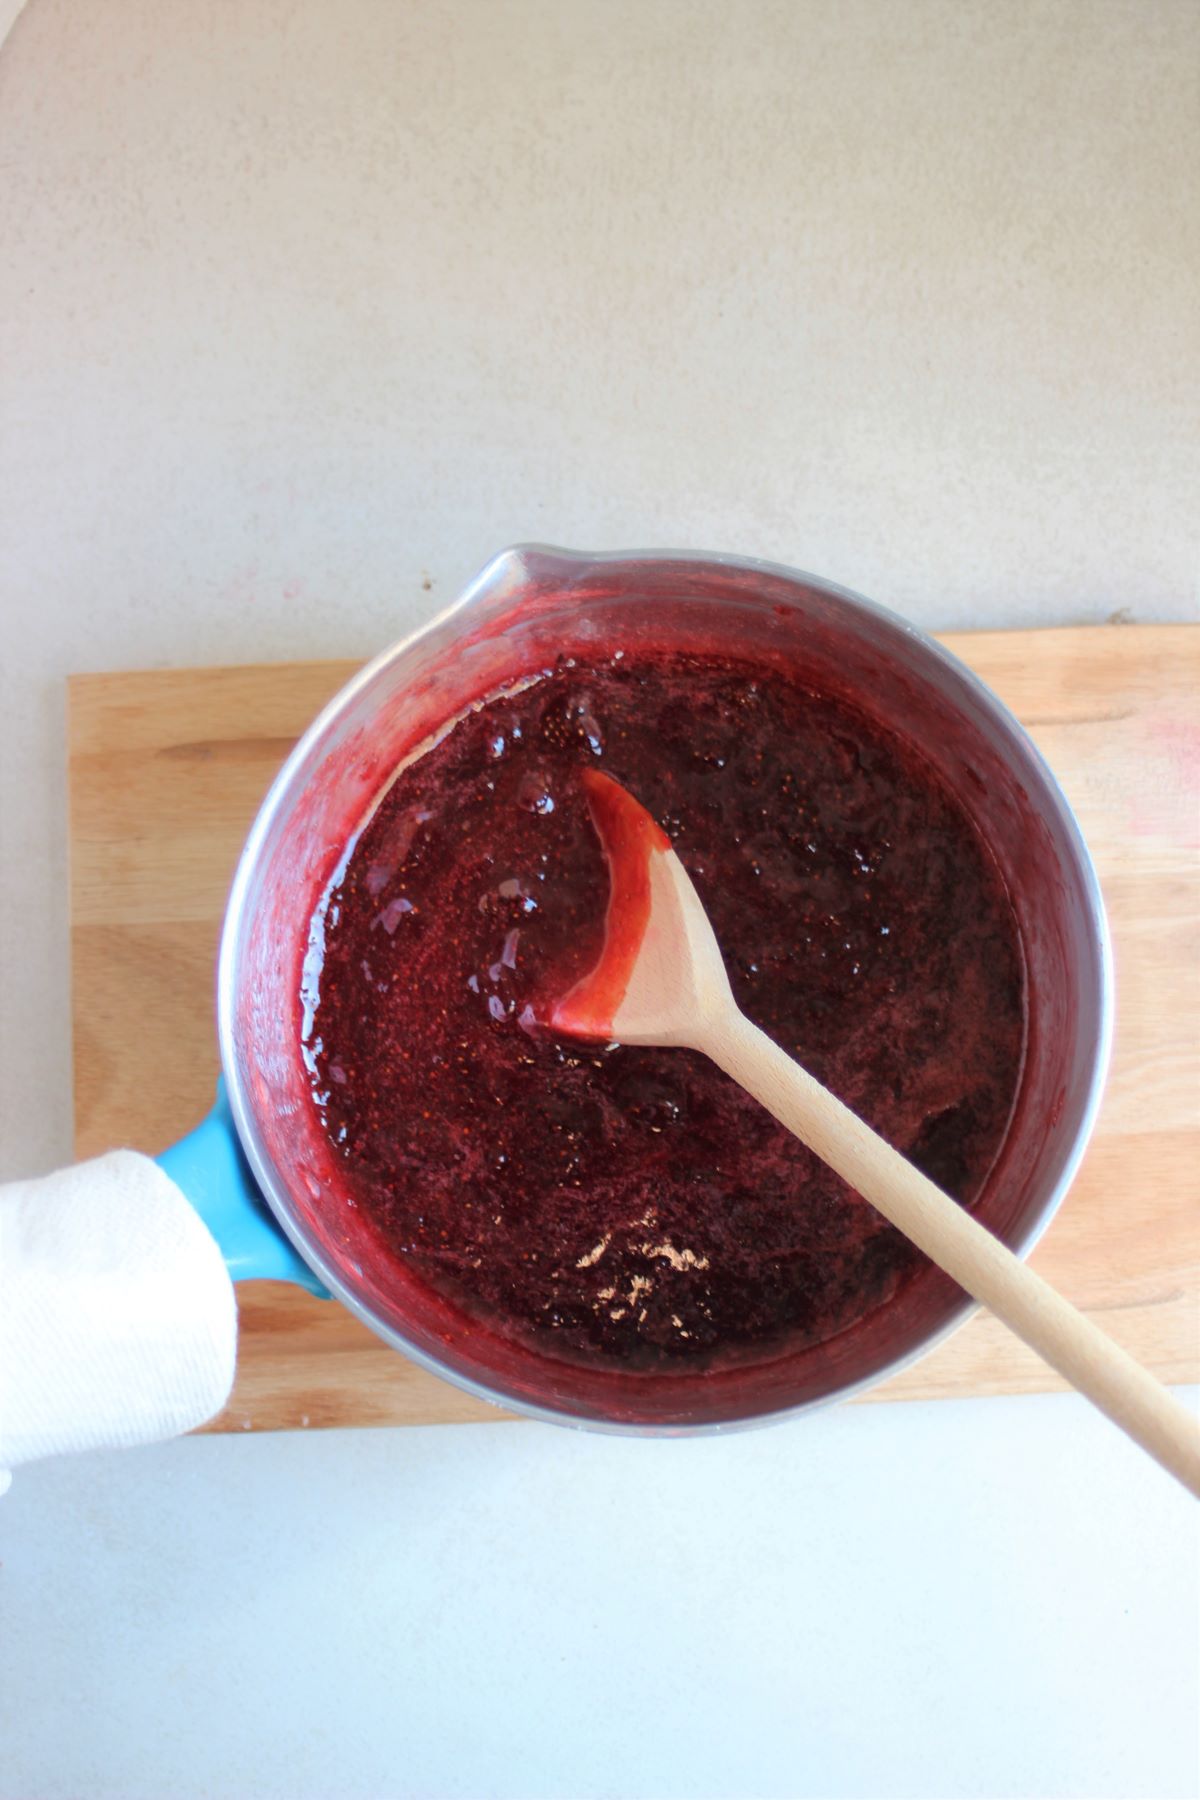 Deep saucepan with strawberry jam and a wooden spoon.